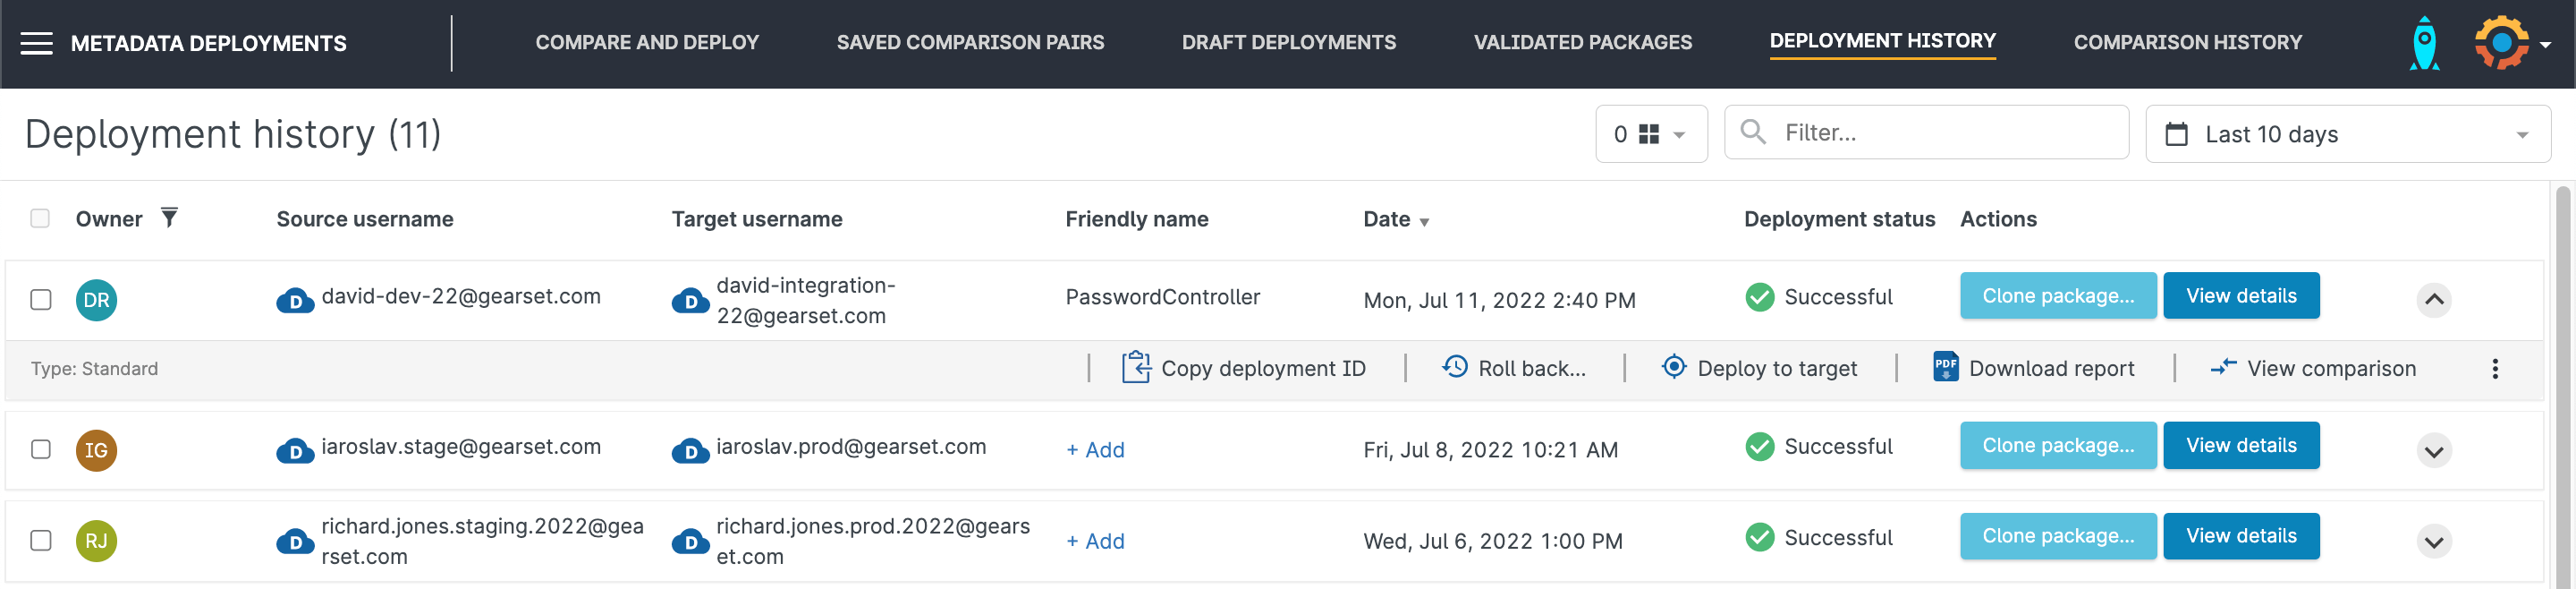 Pick a deployment to roll back from Gearset’s deployment history page